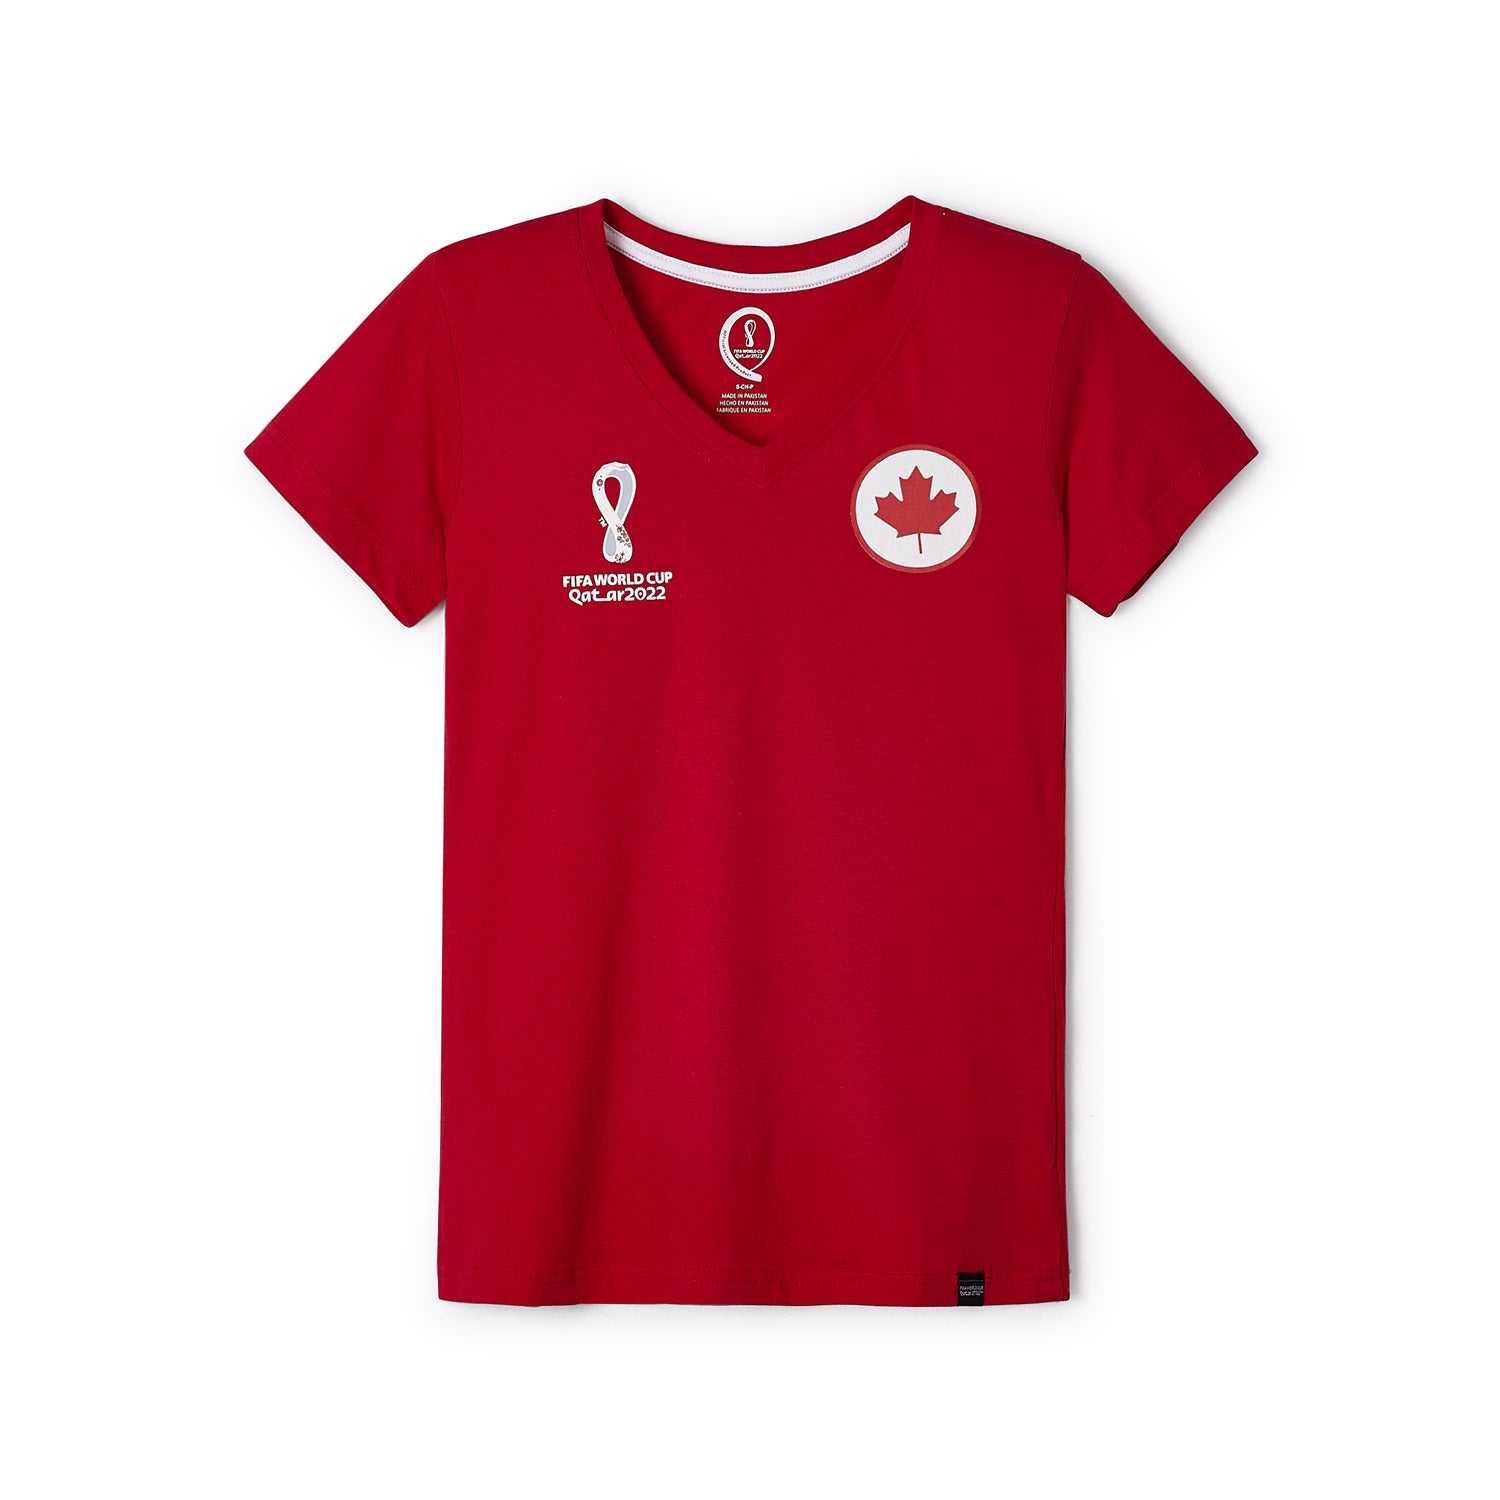 2022 World Cup Canada Red T-Shirt - Womens